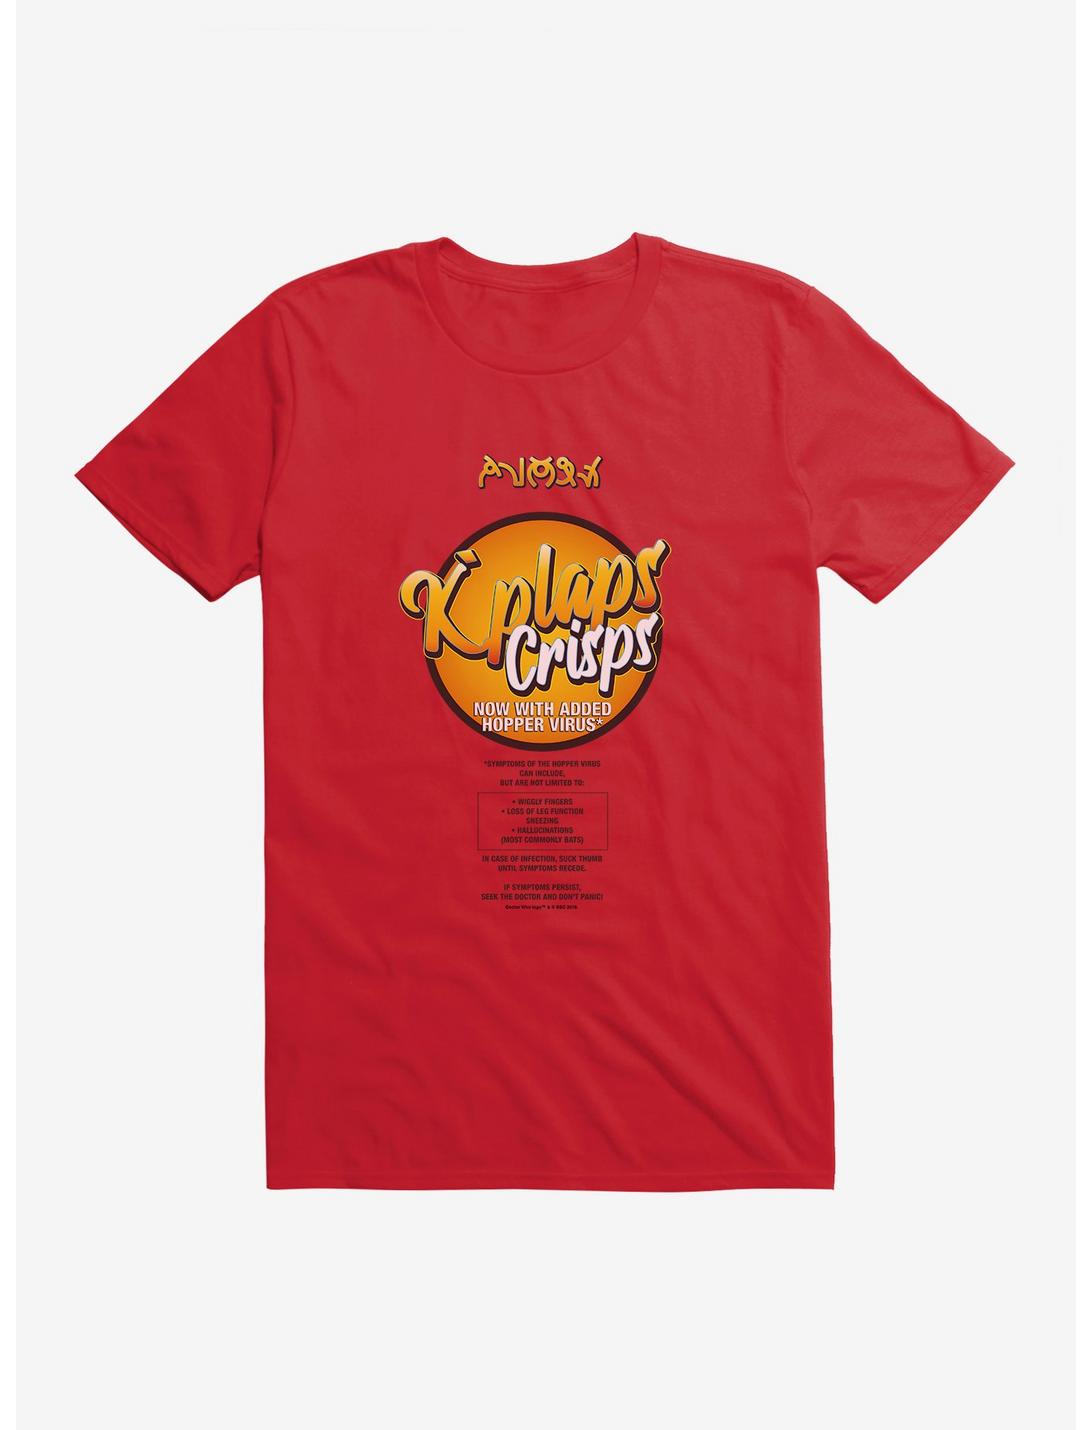 Doctor Who Series 12 Episode 3 K'Plaps Crisps Red T-Shirt, RED, hi-res